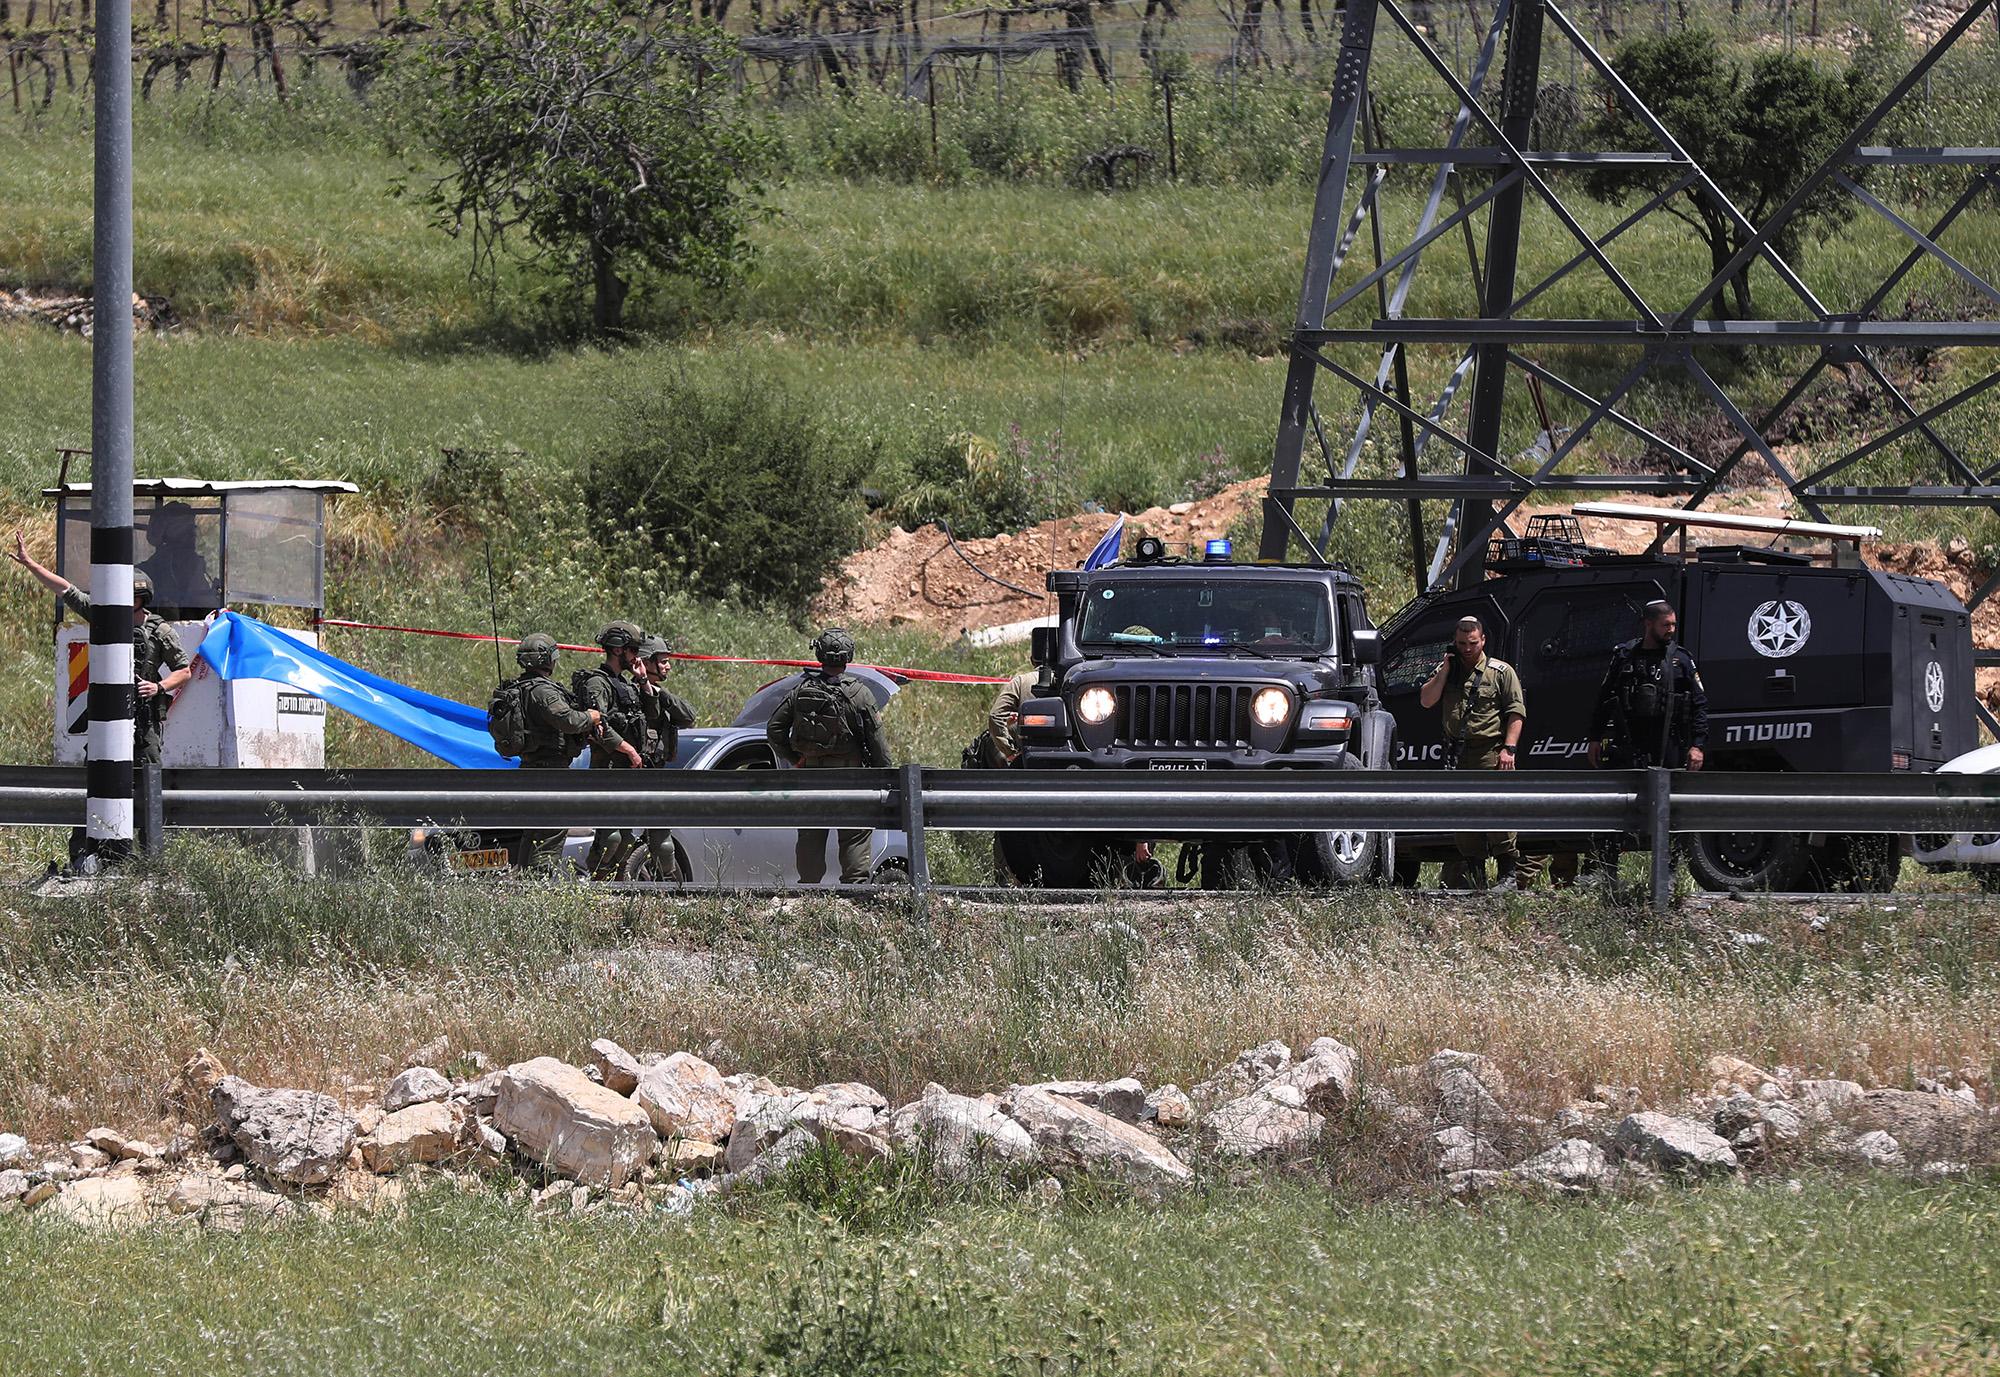 Israeli security forces block the road and investigate the scene after Israeli soldiers shot a Palestinian woman  near Hebron, West Bank, on April 24.